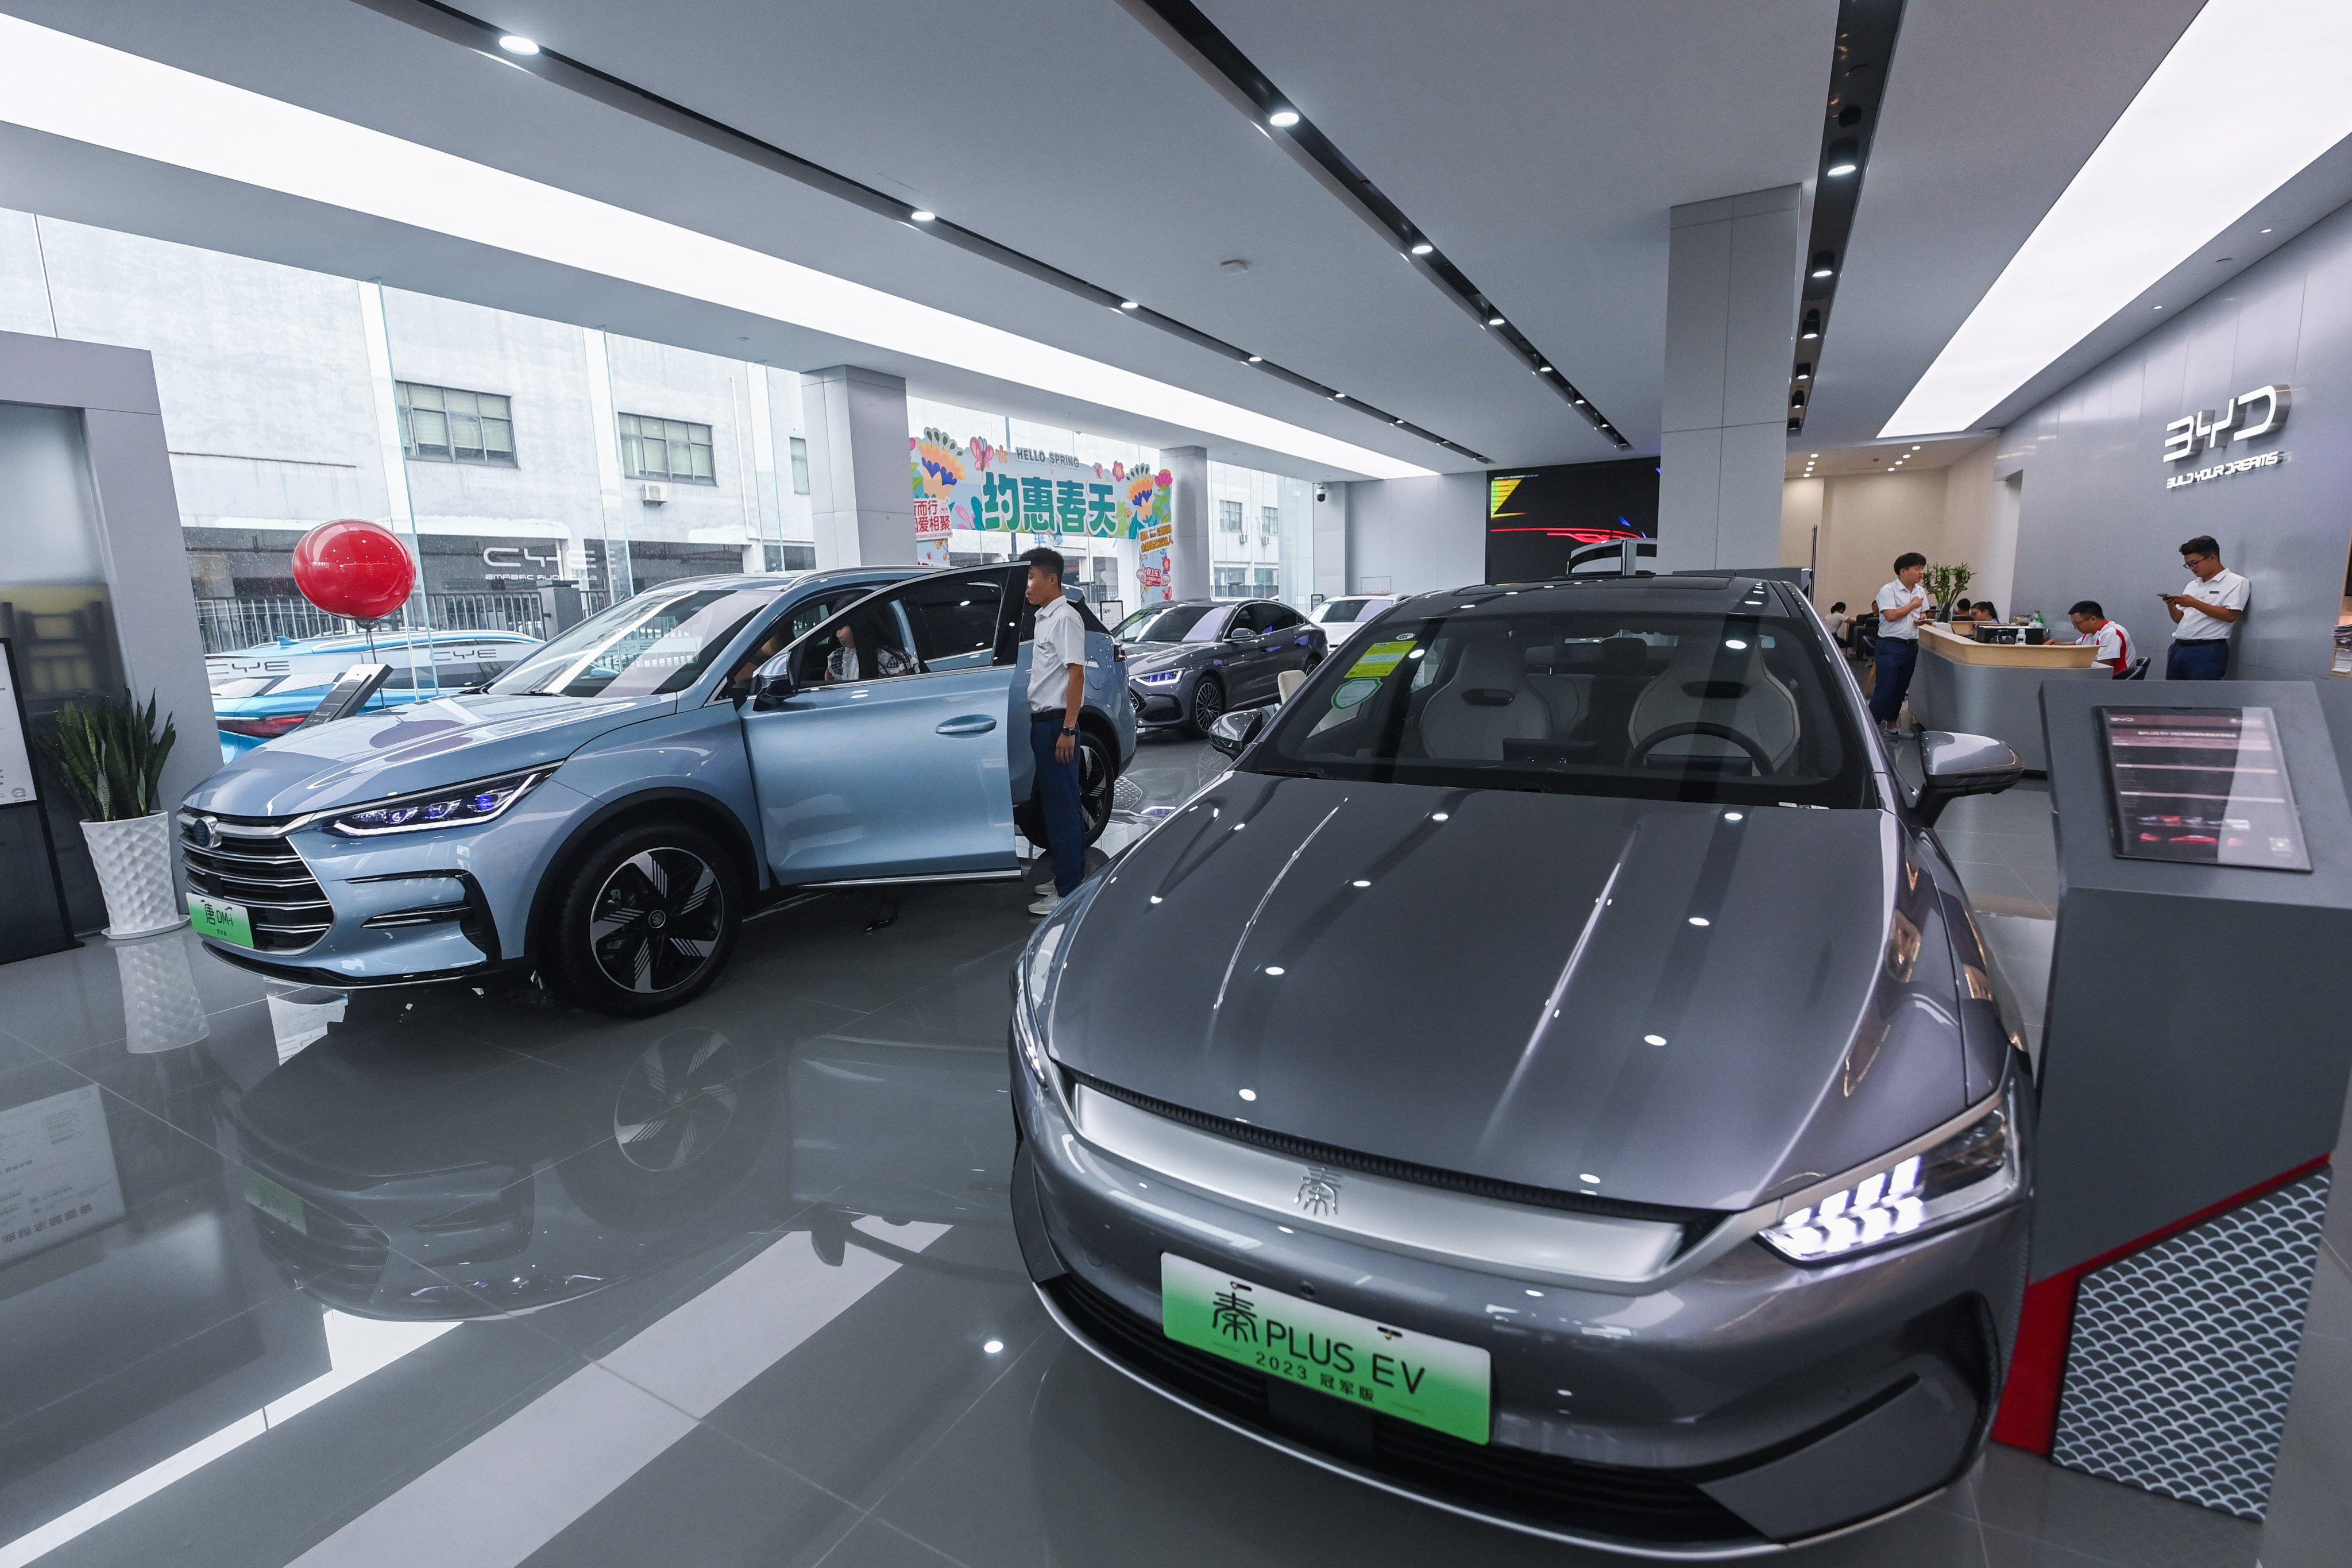 Electric cars sit on display at a BYD exhibition hall in Fuyang District of Hangzhou, in east China’s Zhejiang Province, on July 18, 2023. Photo: Xinhua